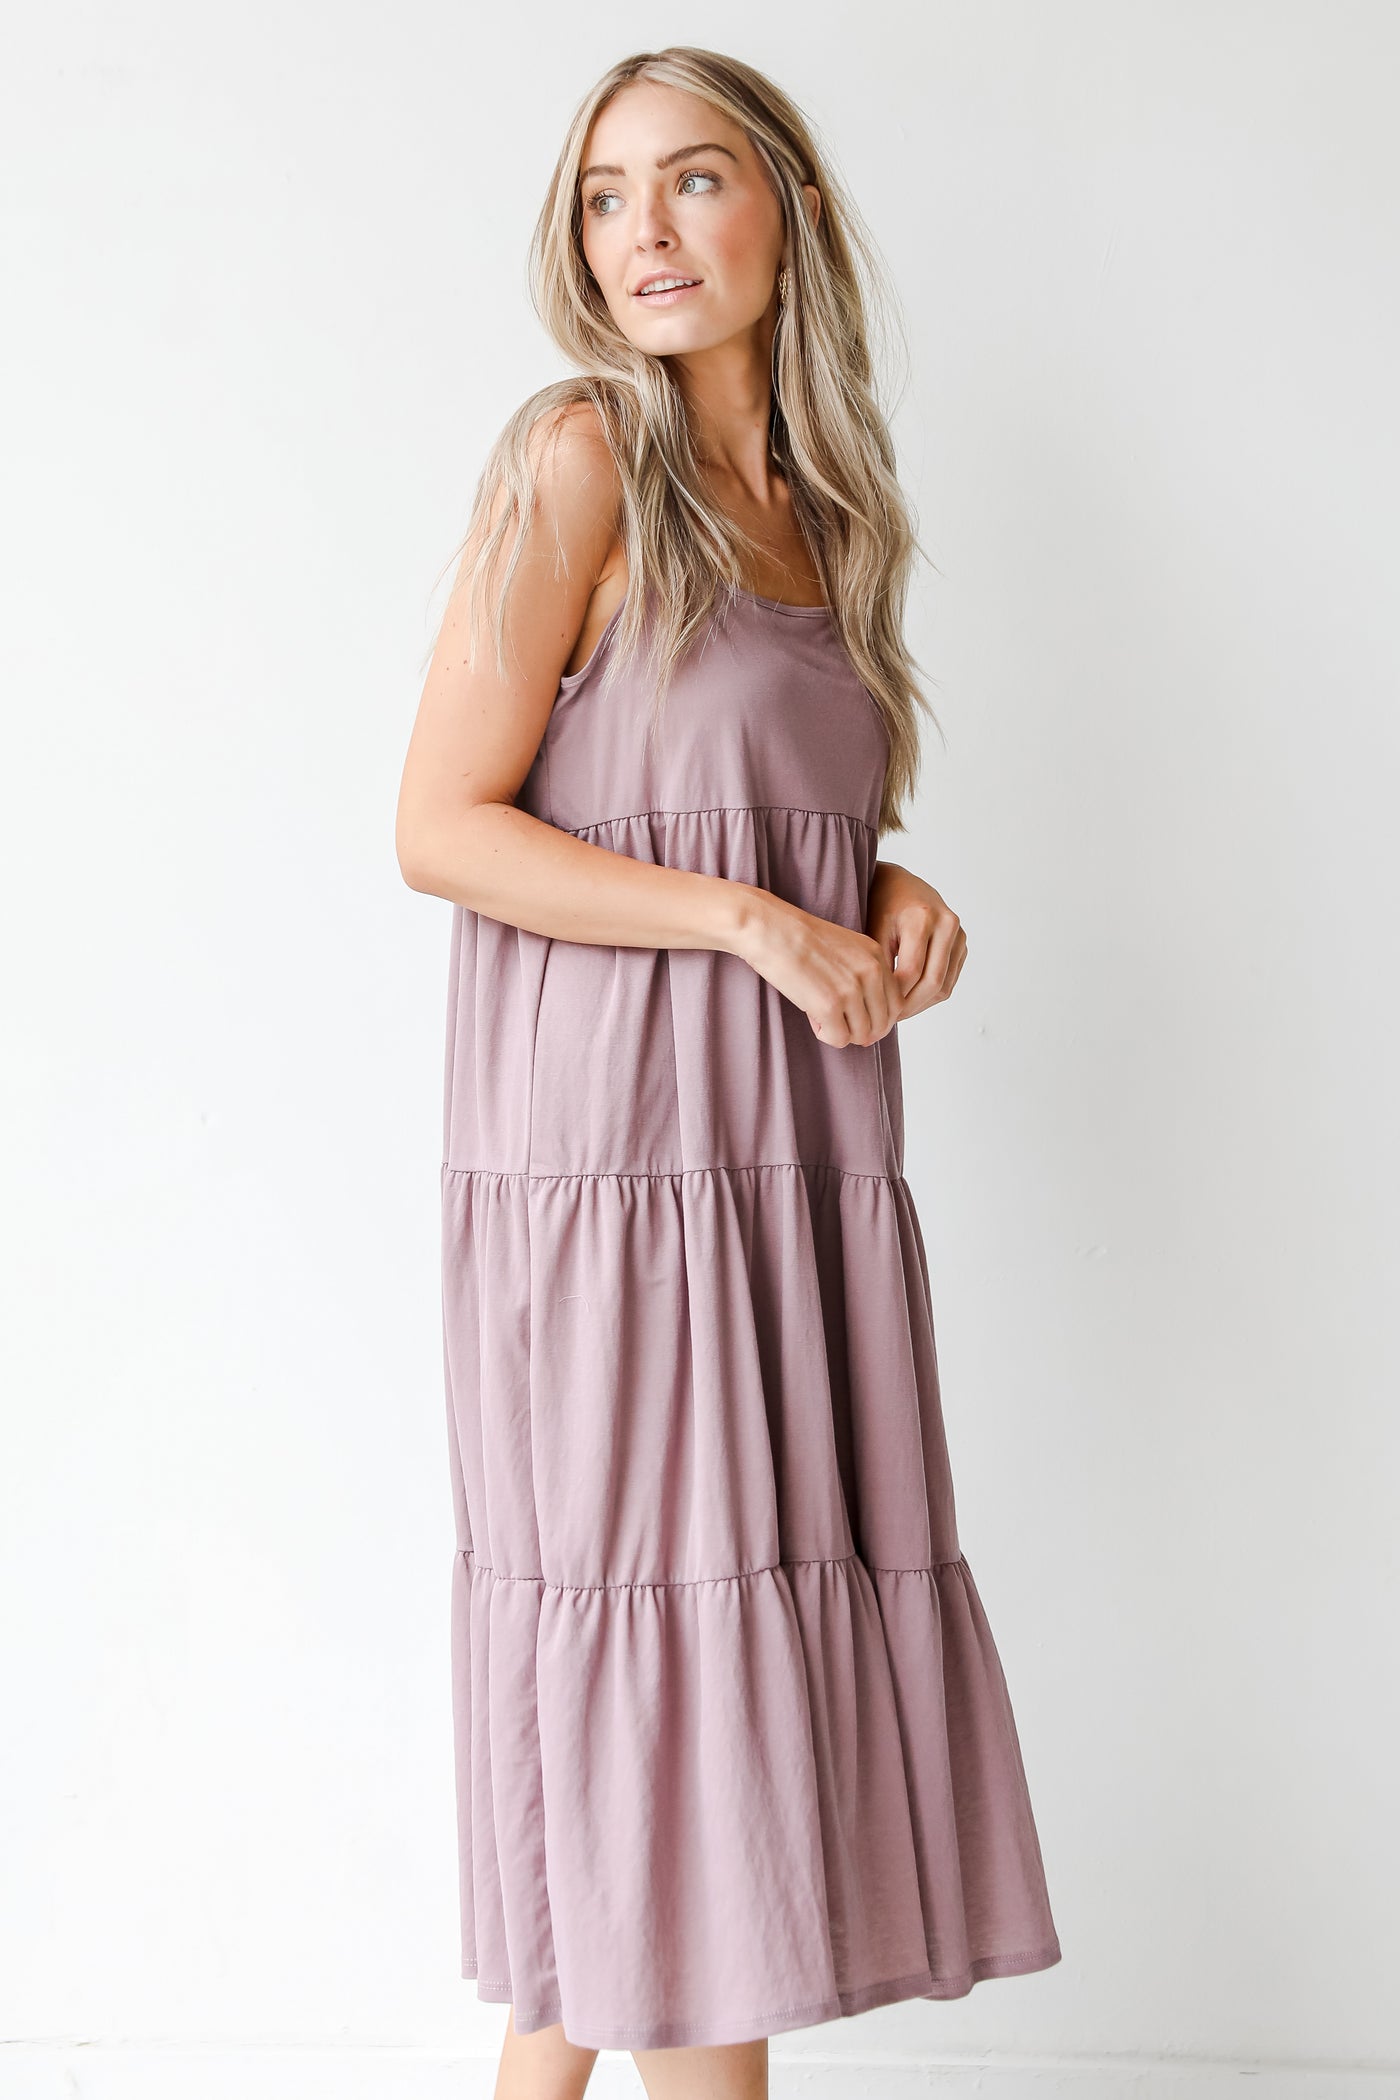 Tiered Midi Dress in lavender side view